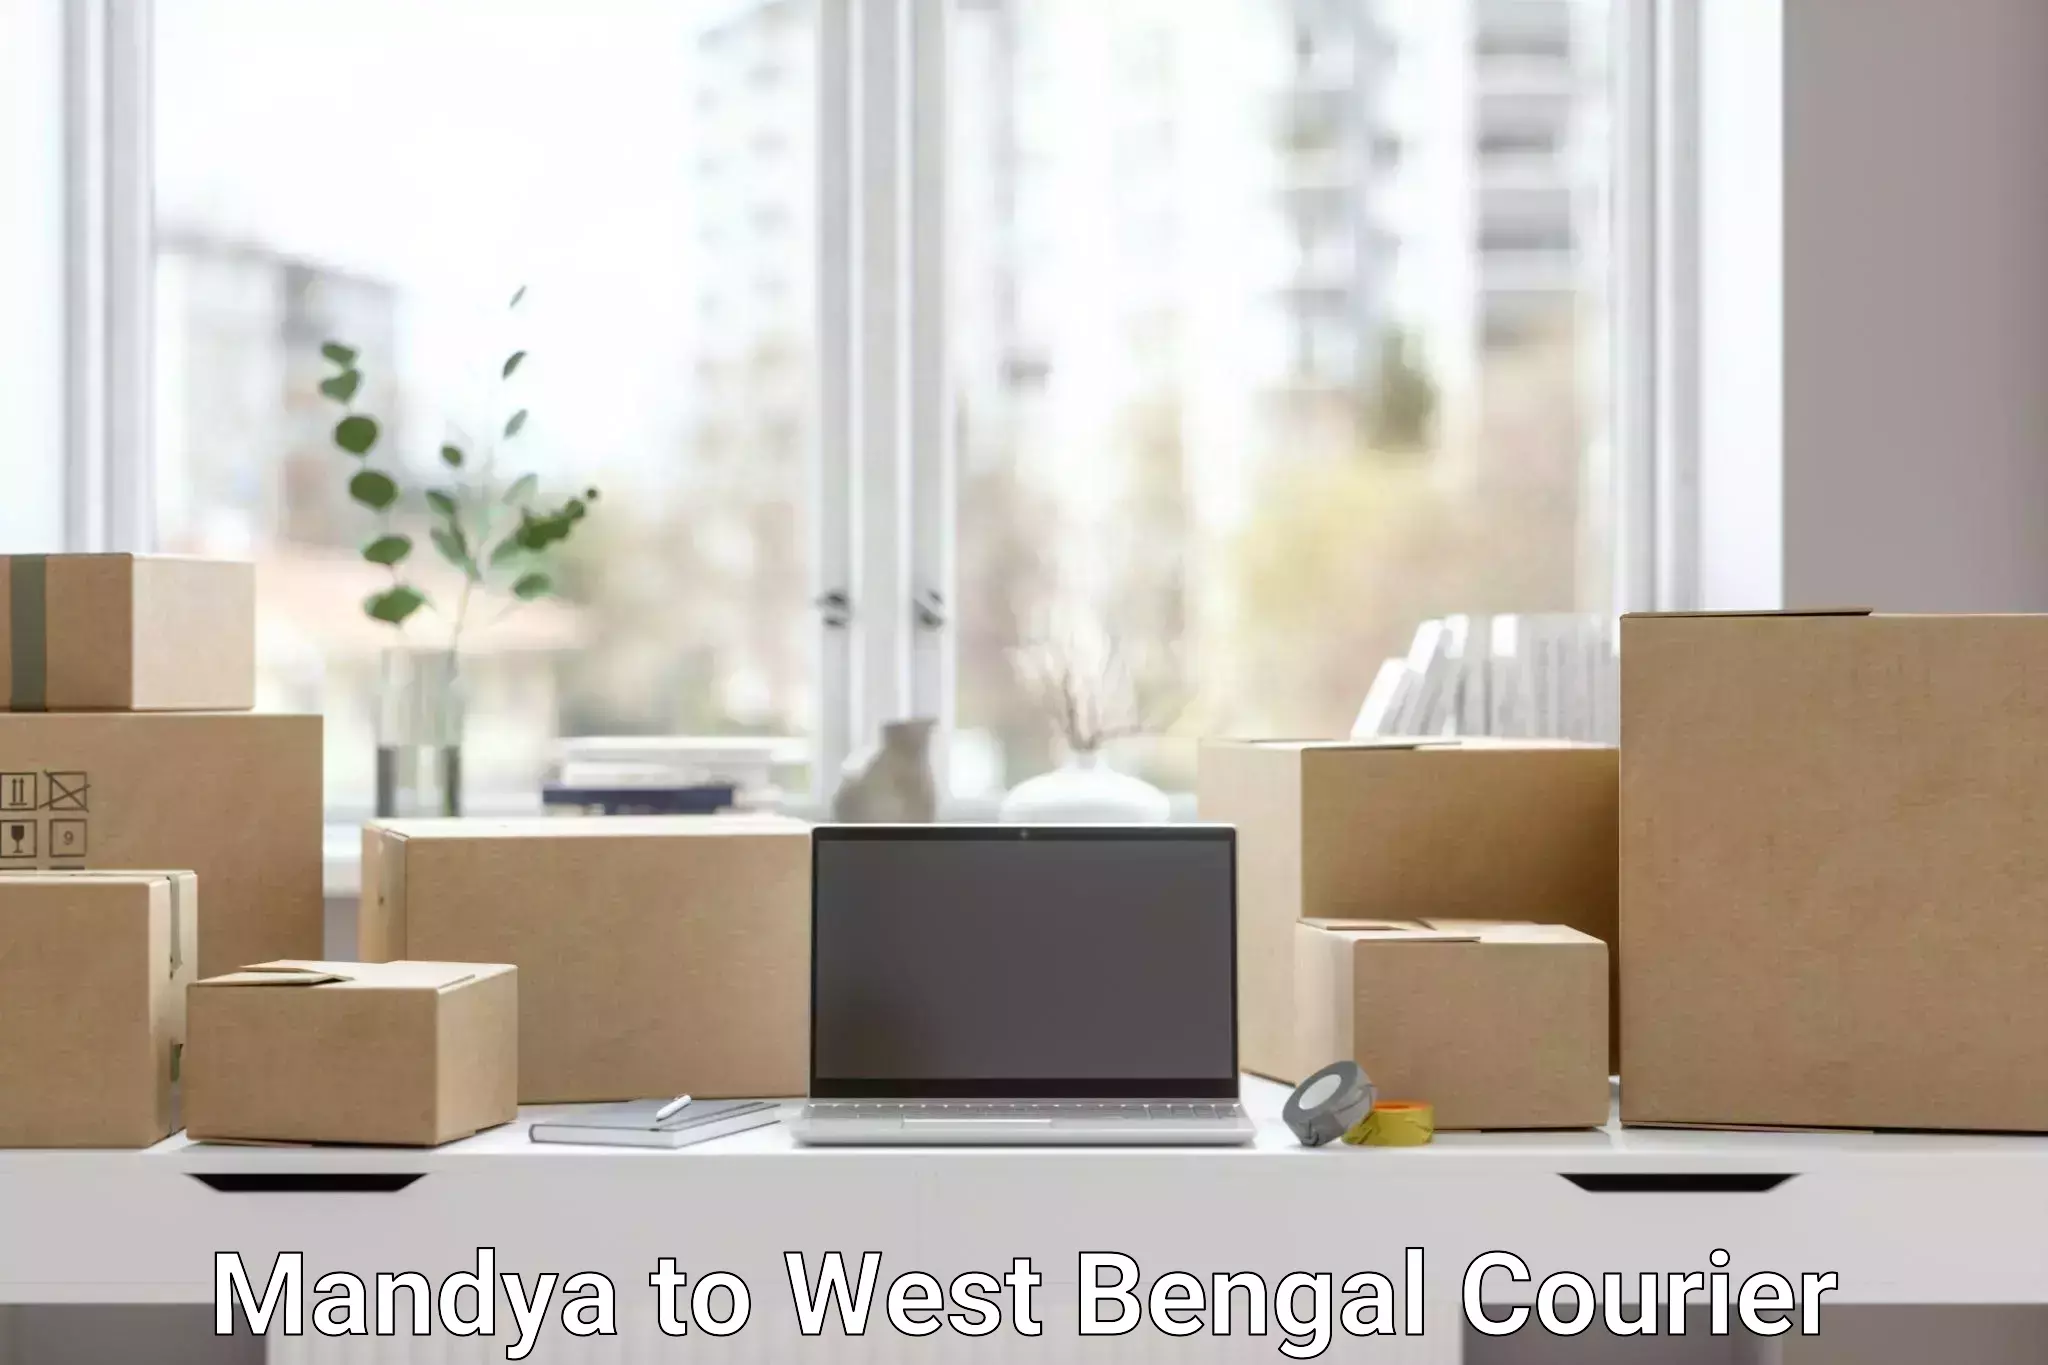 Enhanced delivery experience in Mandya to West Bengal